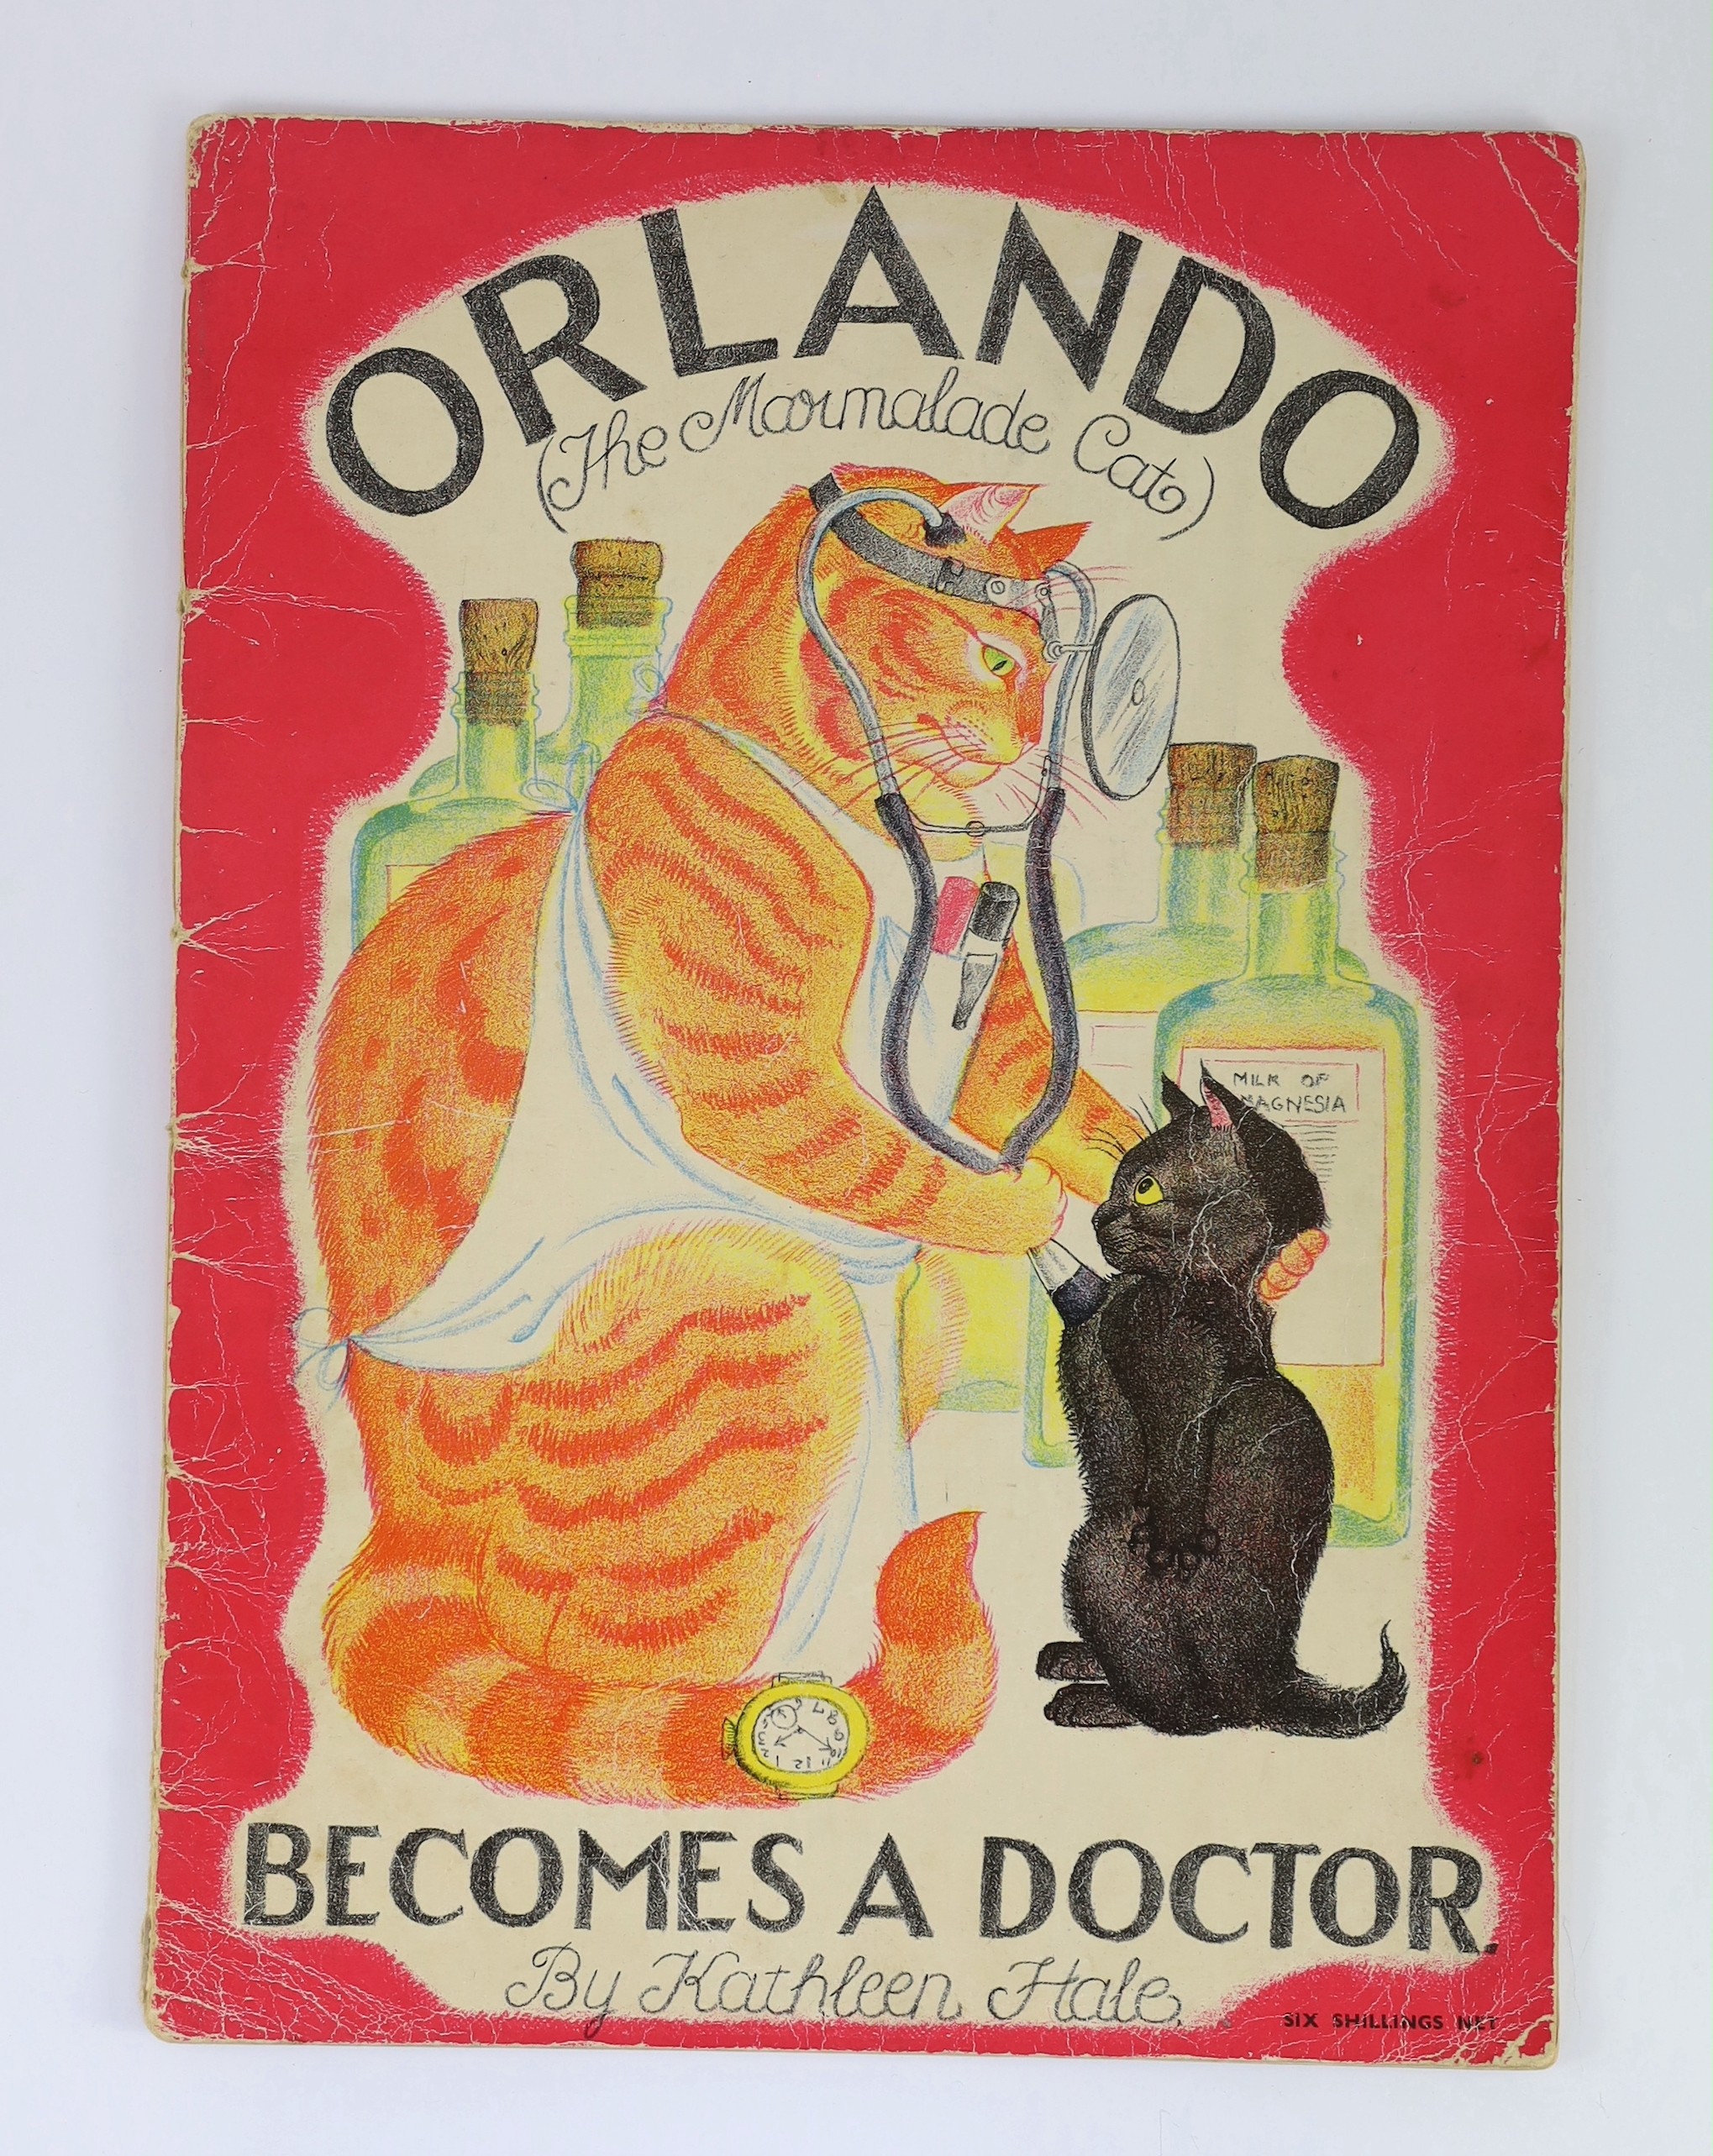 Hale, Kathleen - Orlando (the Marmalade Cat). Becomes a Doctor. First edition, coloured pictorial title and coloured illus. throughout. publisher's coloured pictorial wrappers, folio.